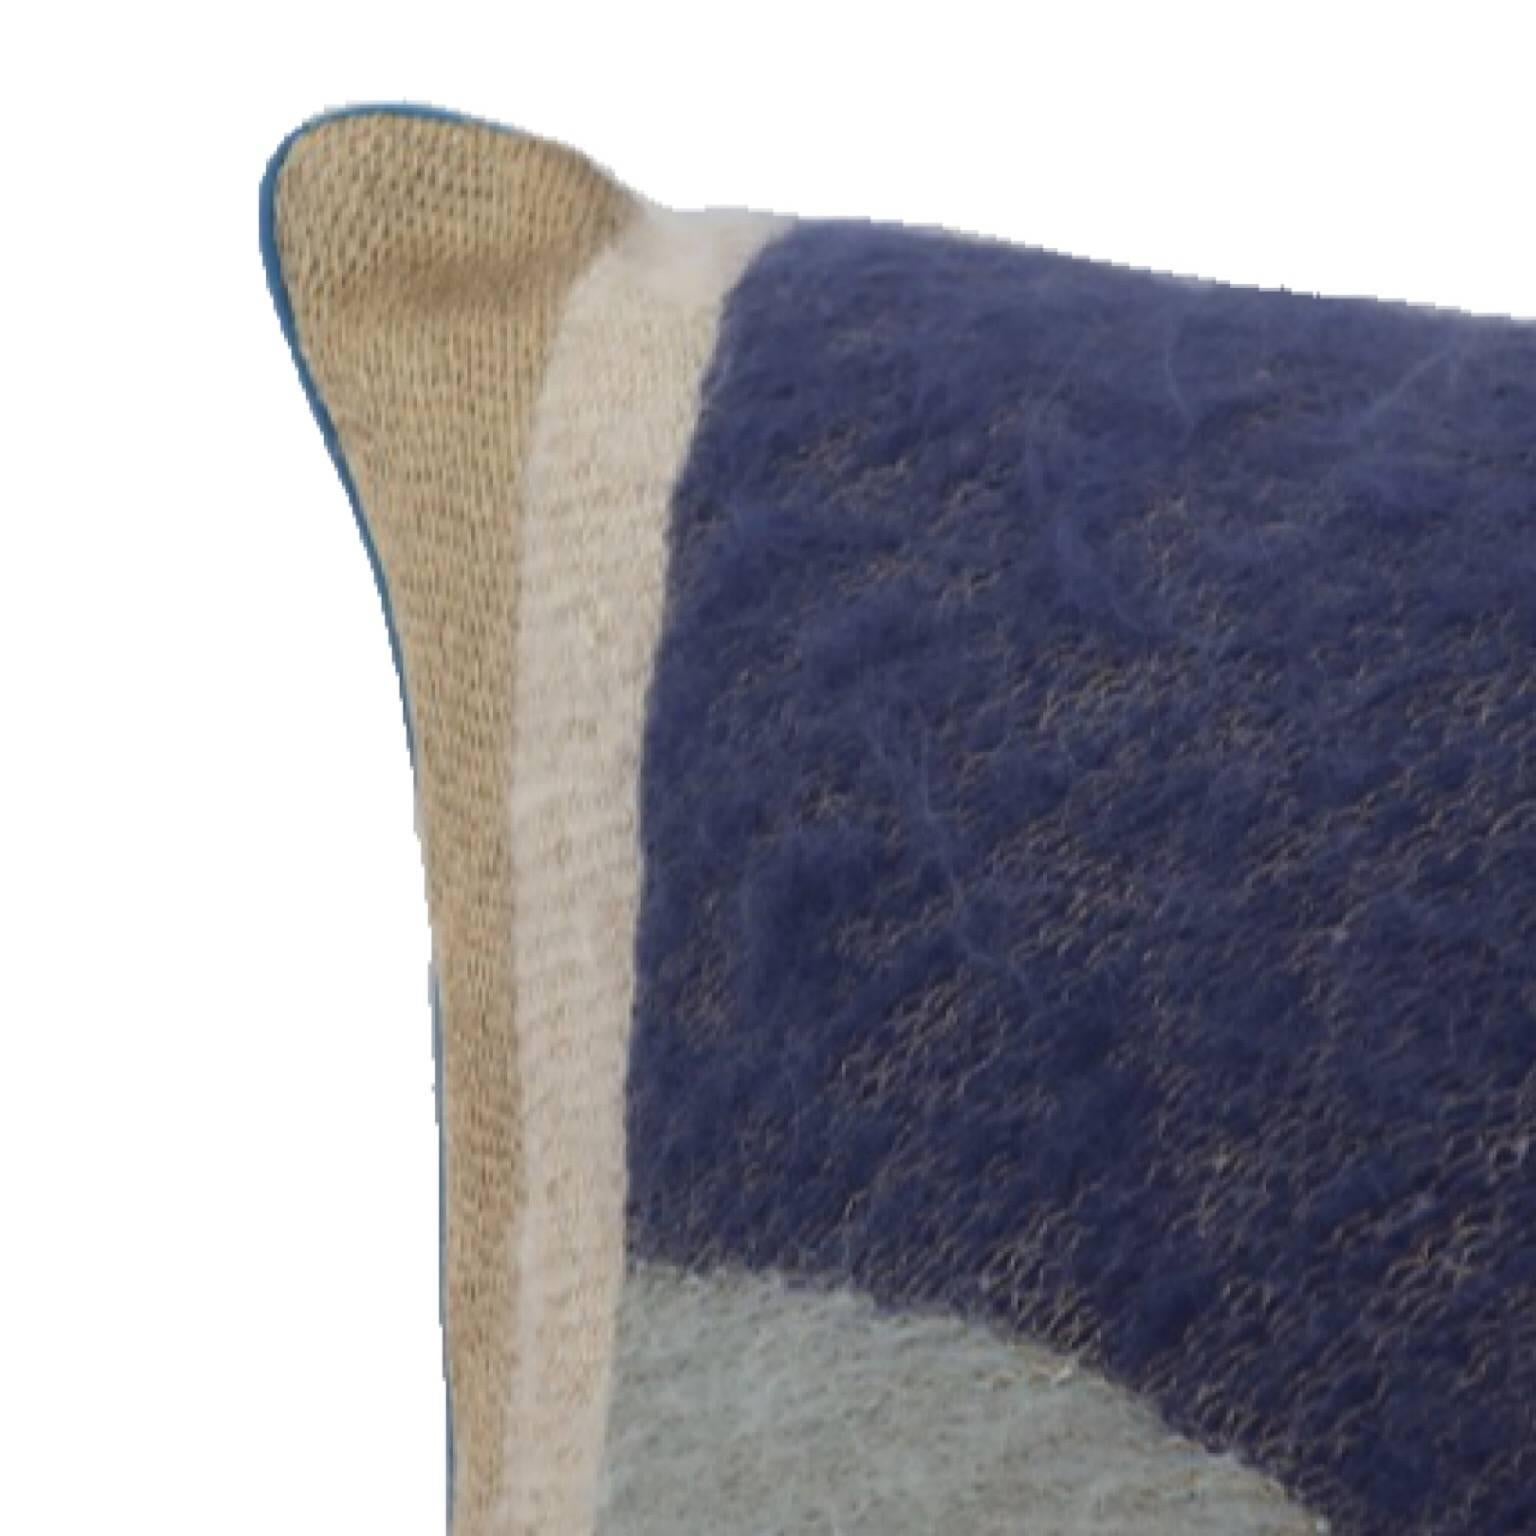 Handcrafted pillow embroidered with mohair yarn and gold metallic threads.